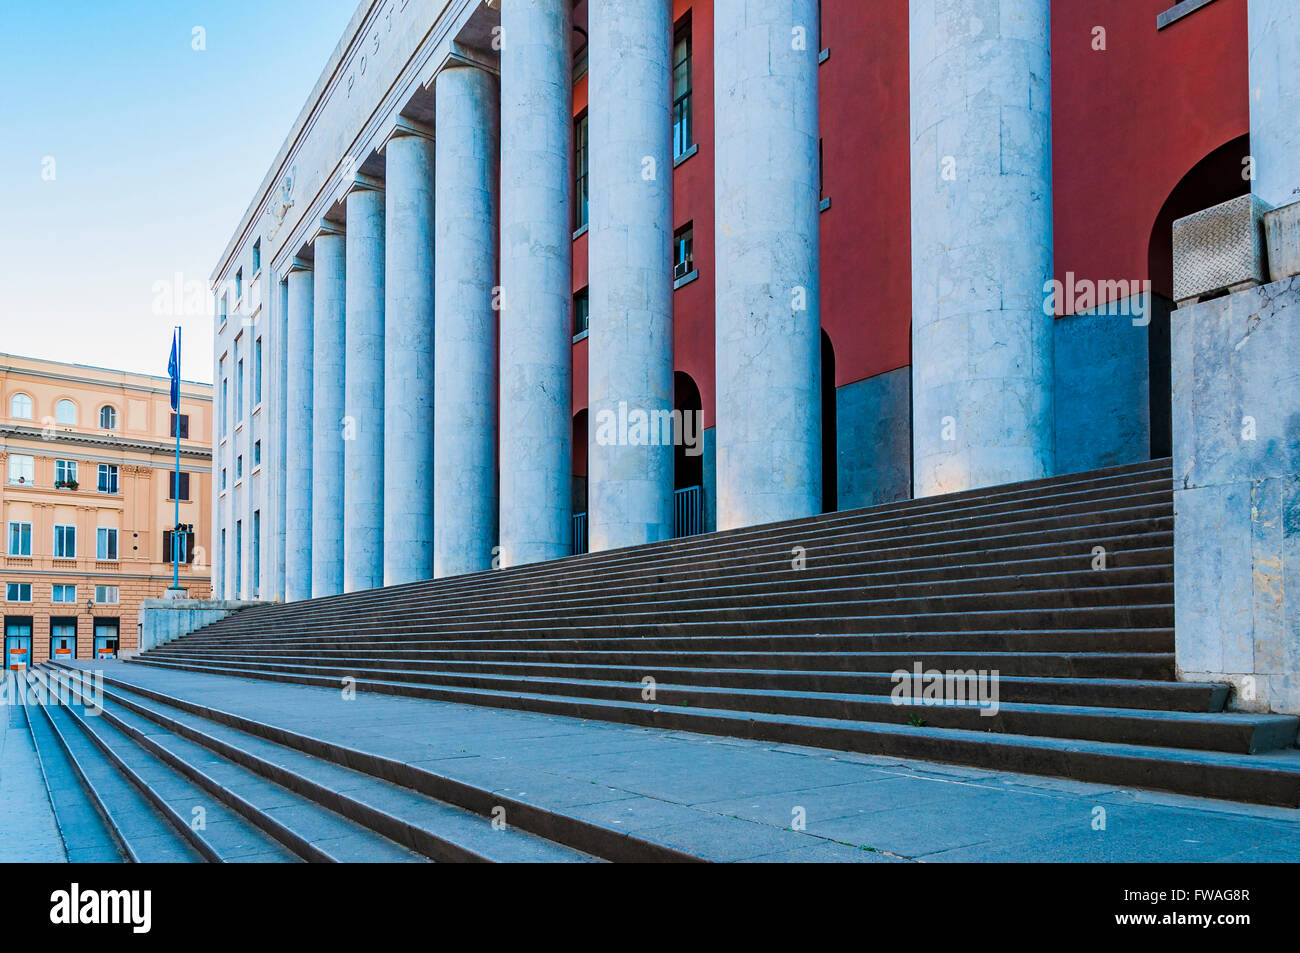 The Post Office building. Fascist Architecture. Palermo, Sicily, Italy. Stock Photo